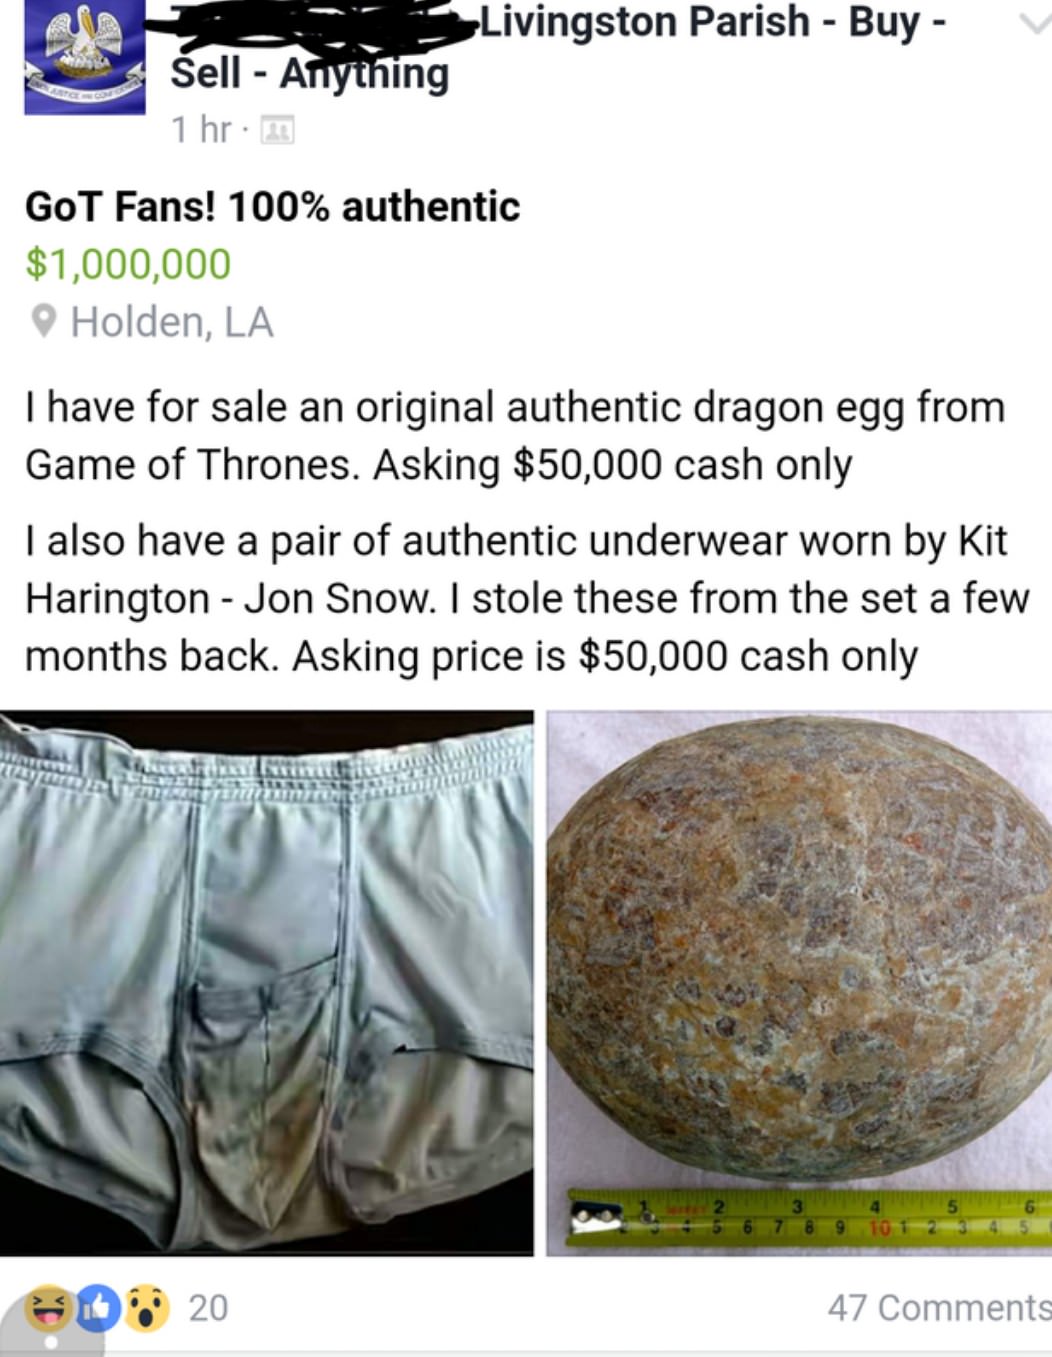 cringe material - 3 Livingston Parish Buy Sell Anytning 1 hr. 2 GoT Fans! 100% authentic $1,000,000 Holden, La I have for sale an original authentic dragon egg from Game of Thrones. Asking $50,000 cash only I also have a pair of authentic underwear worn b